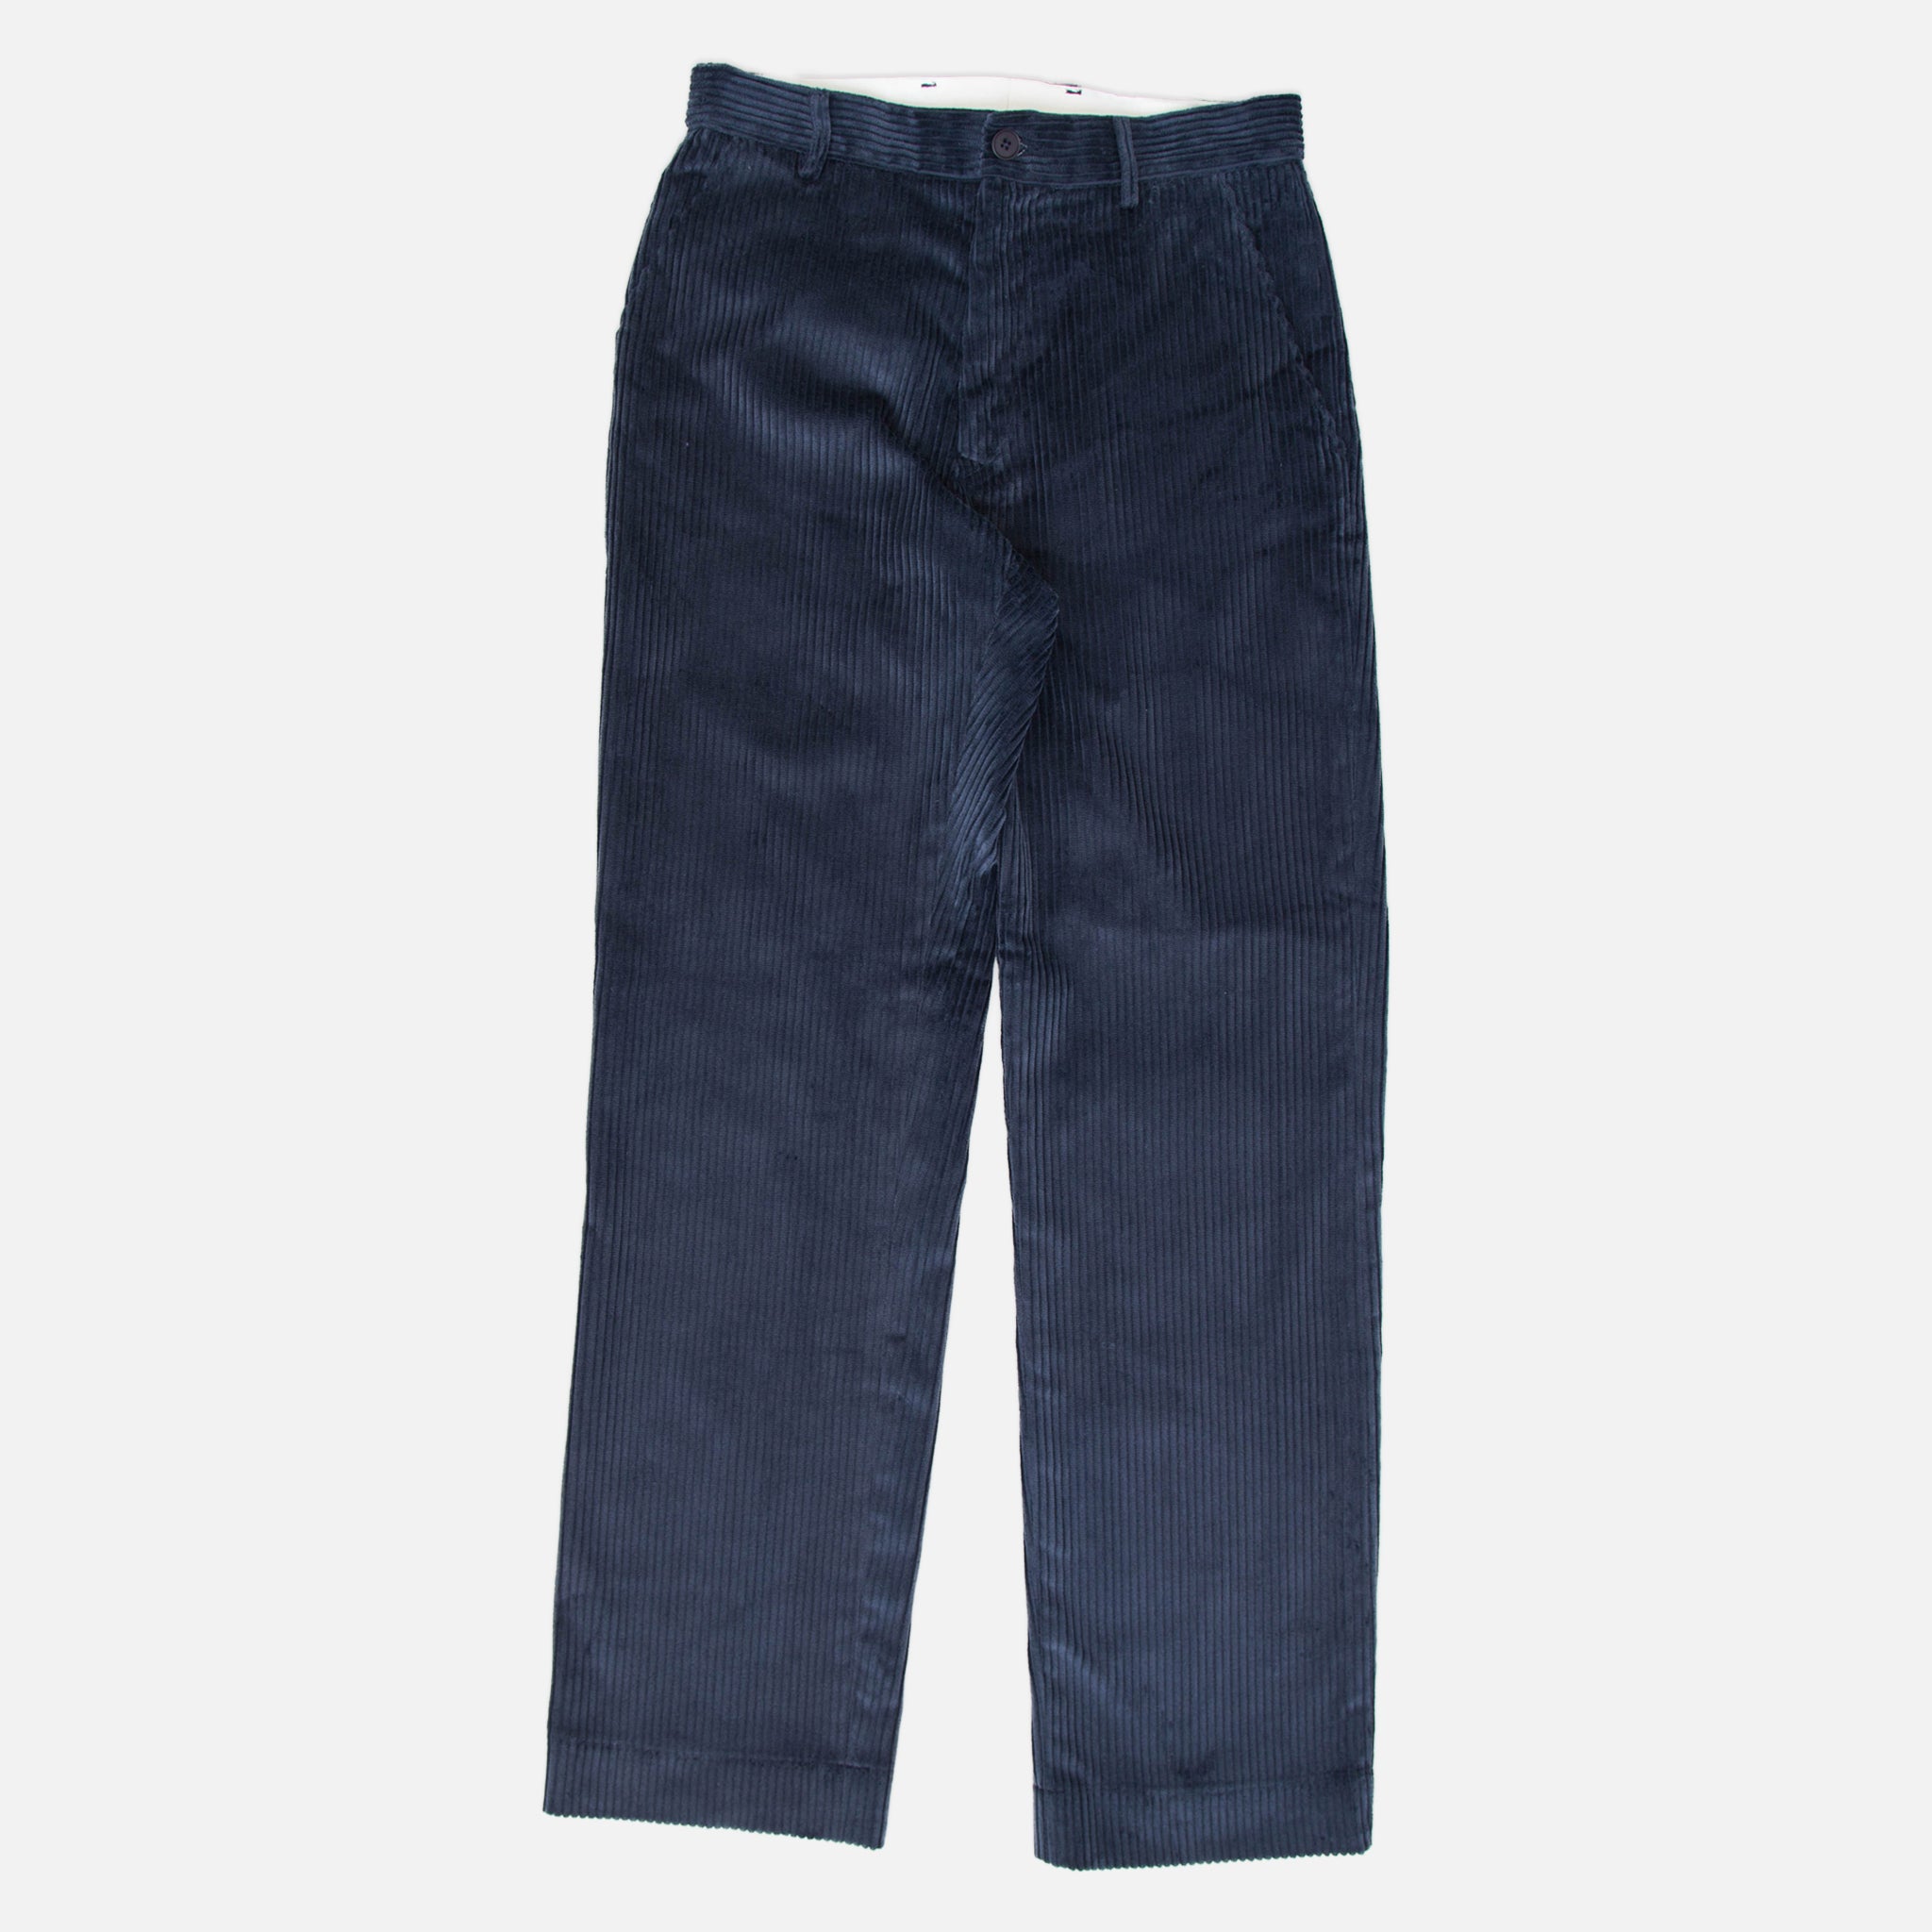 Navy Corduroy Boy's Slim Pant | Vintage Inspired Clothes for Boys